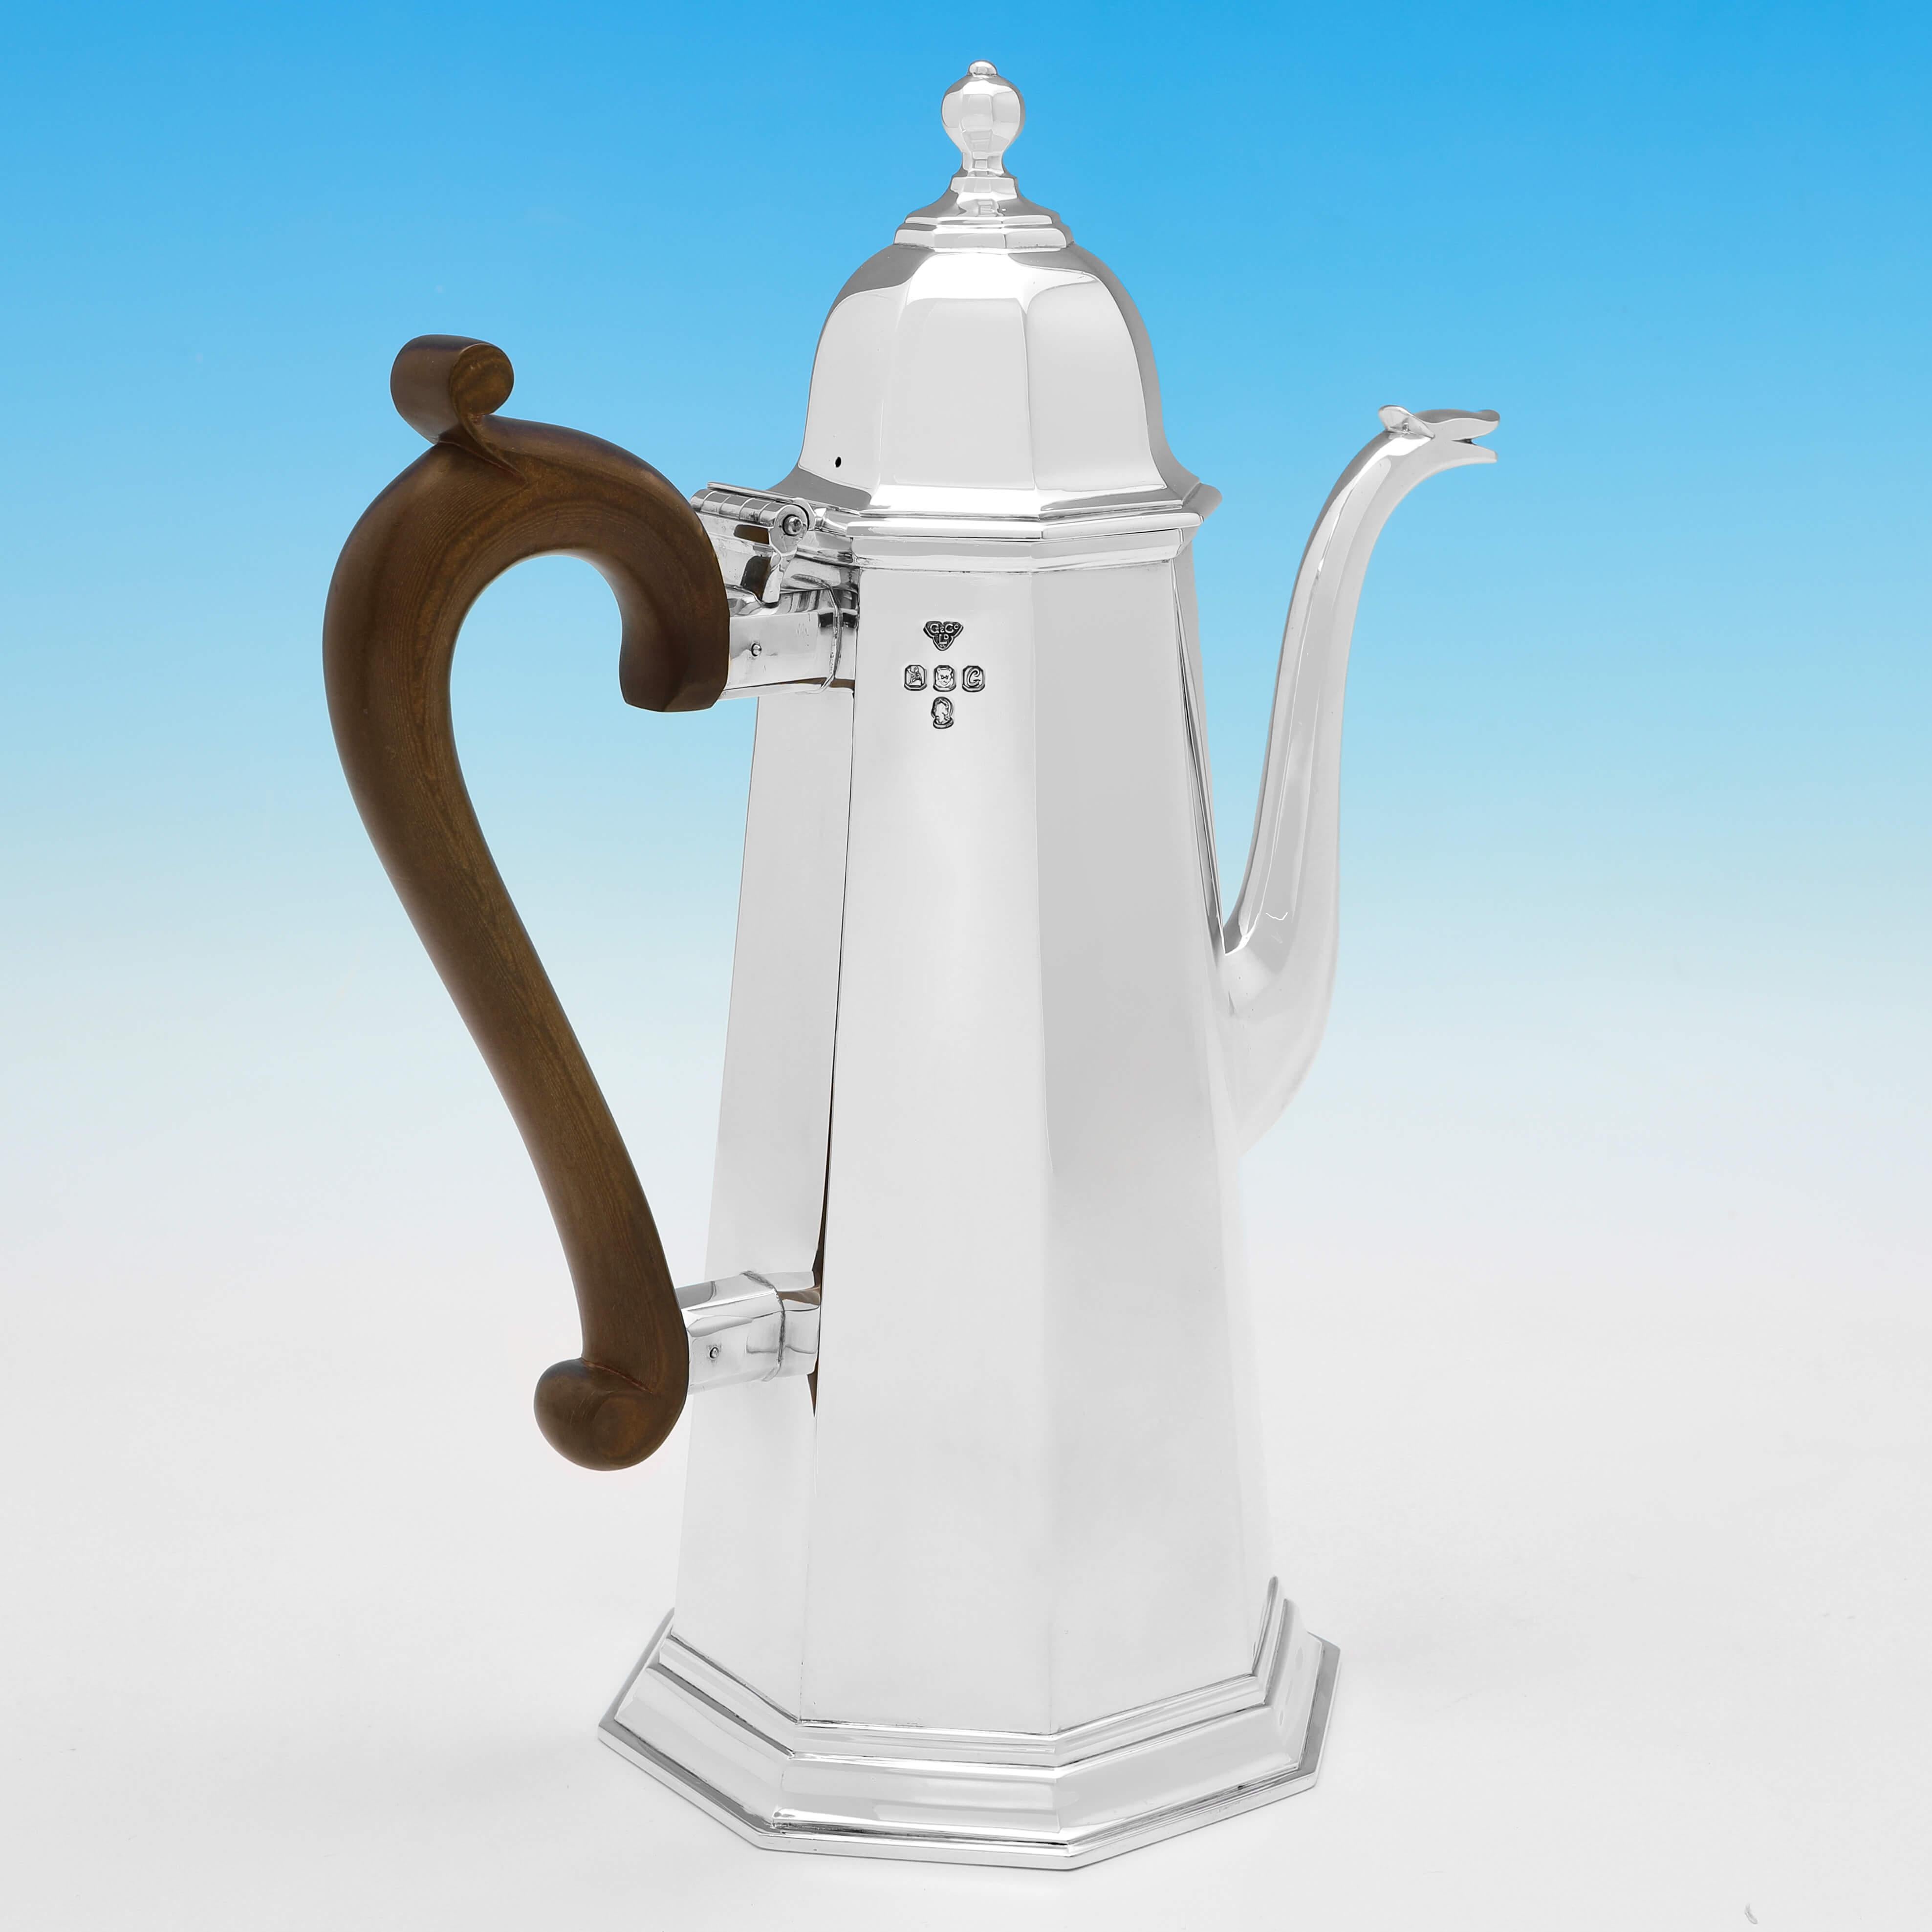 Hallmarked in London, 1977 by Garrard & Co., this Britannia Standard Silver Coffee Pot is in excellent condition. This magnificent coffee pot is octagonal in shape with a serpent spout and a fruitwood handle. 

It measures 11